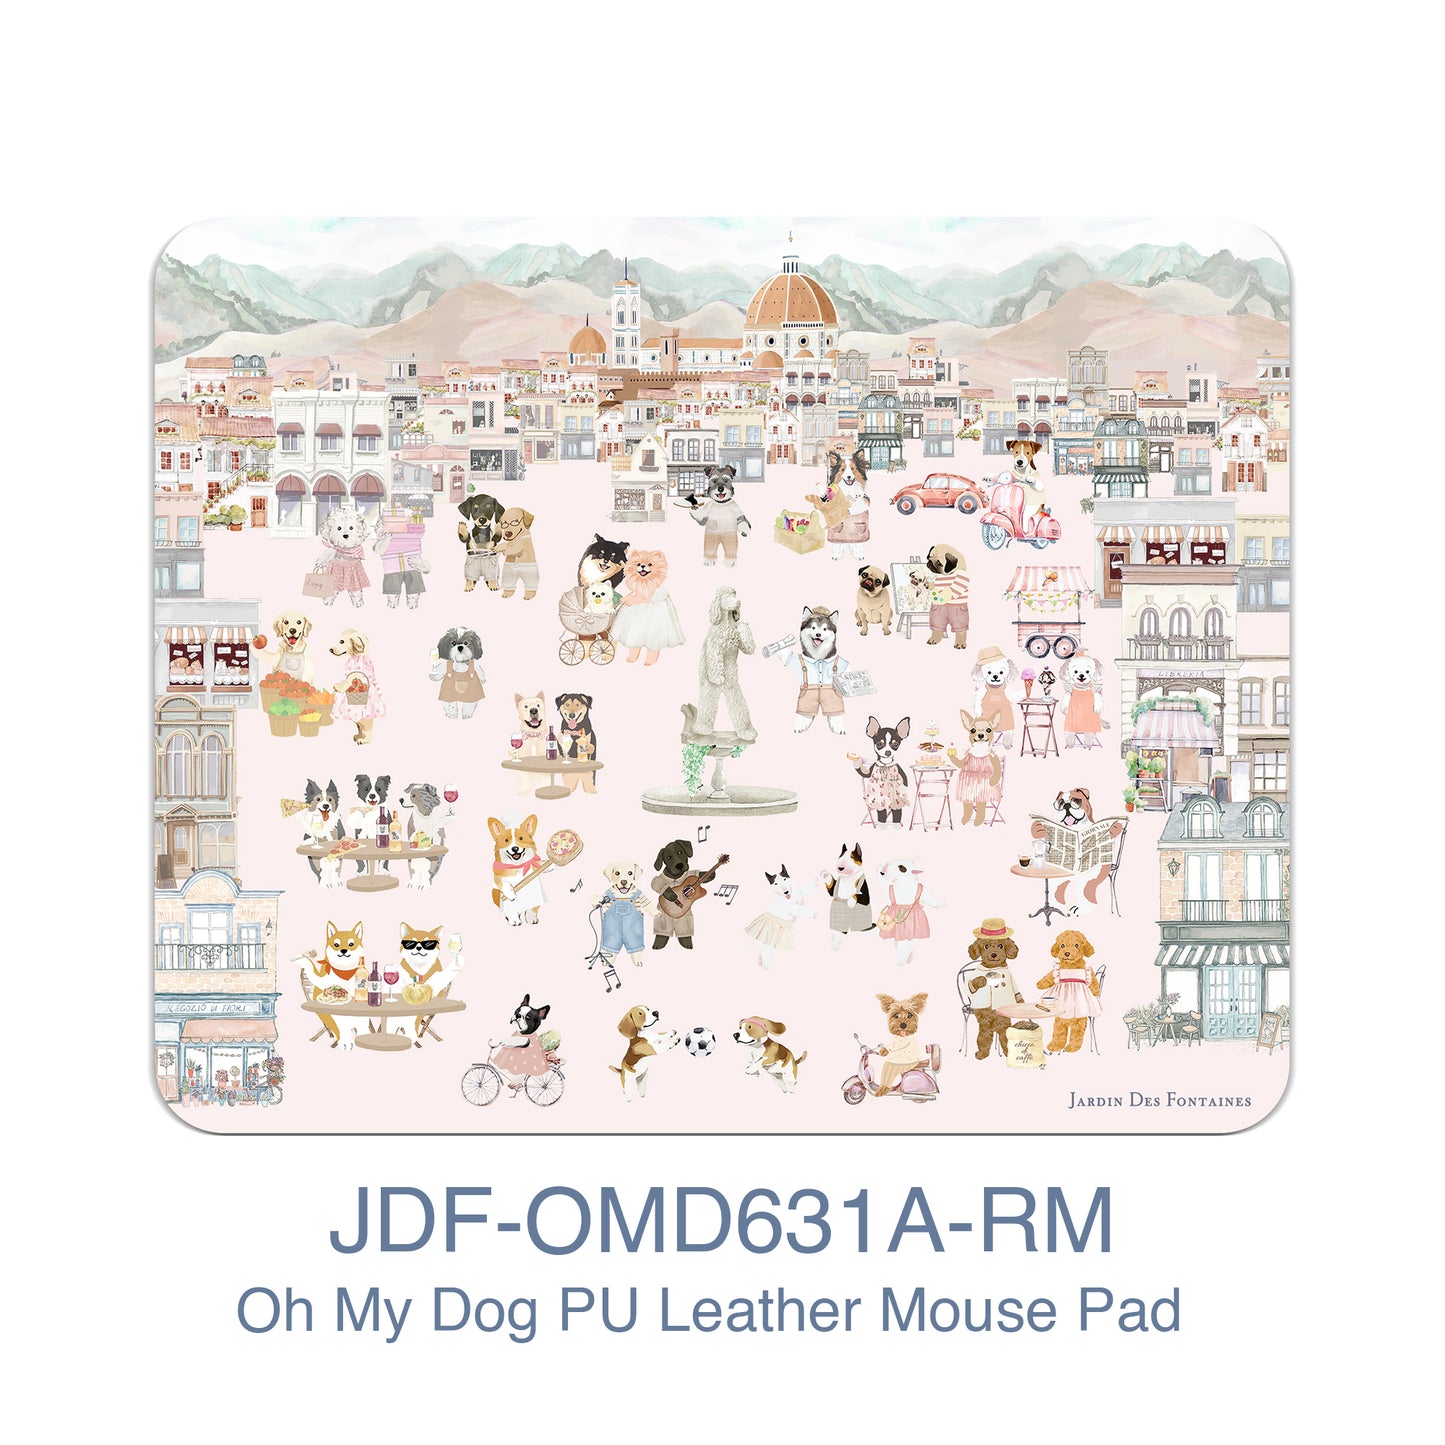 "Oh My Dog" PU Leather Mouse Pad